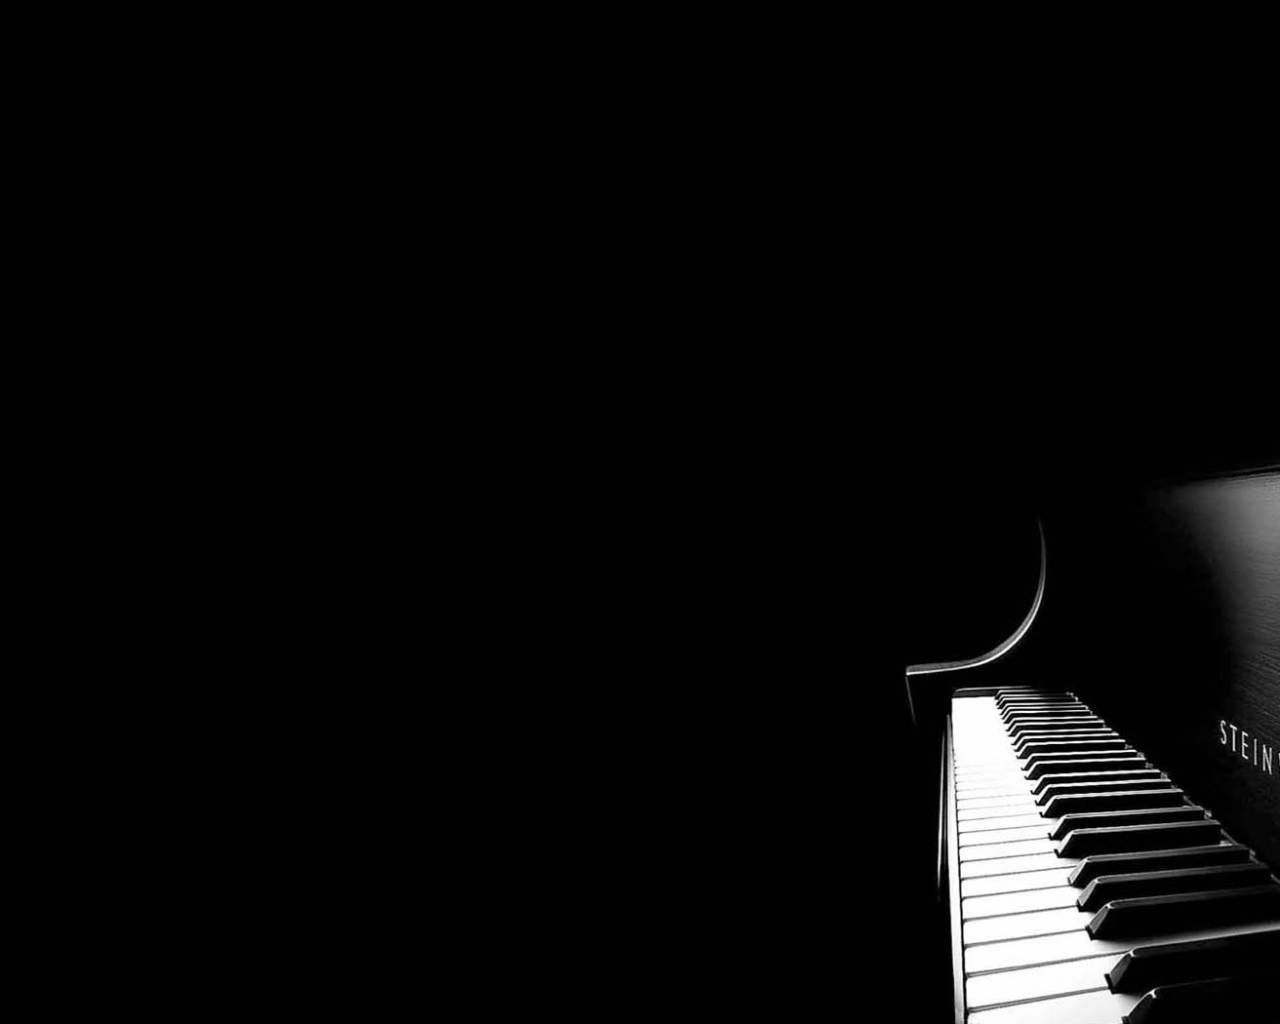 Piano keys music objects wallpaper image Chainimage